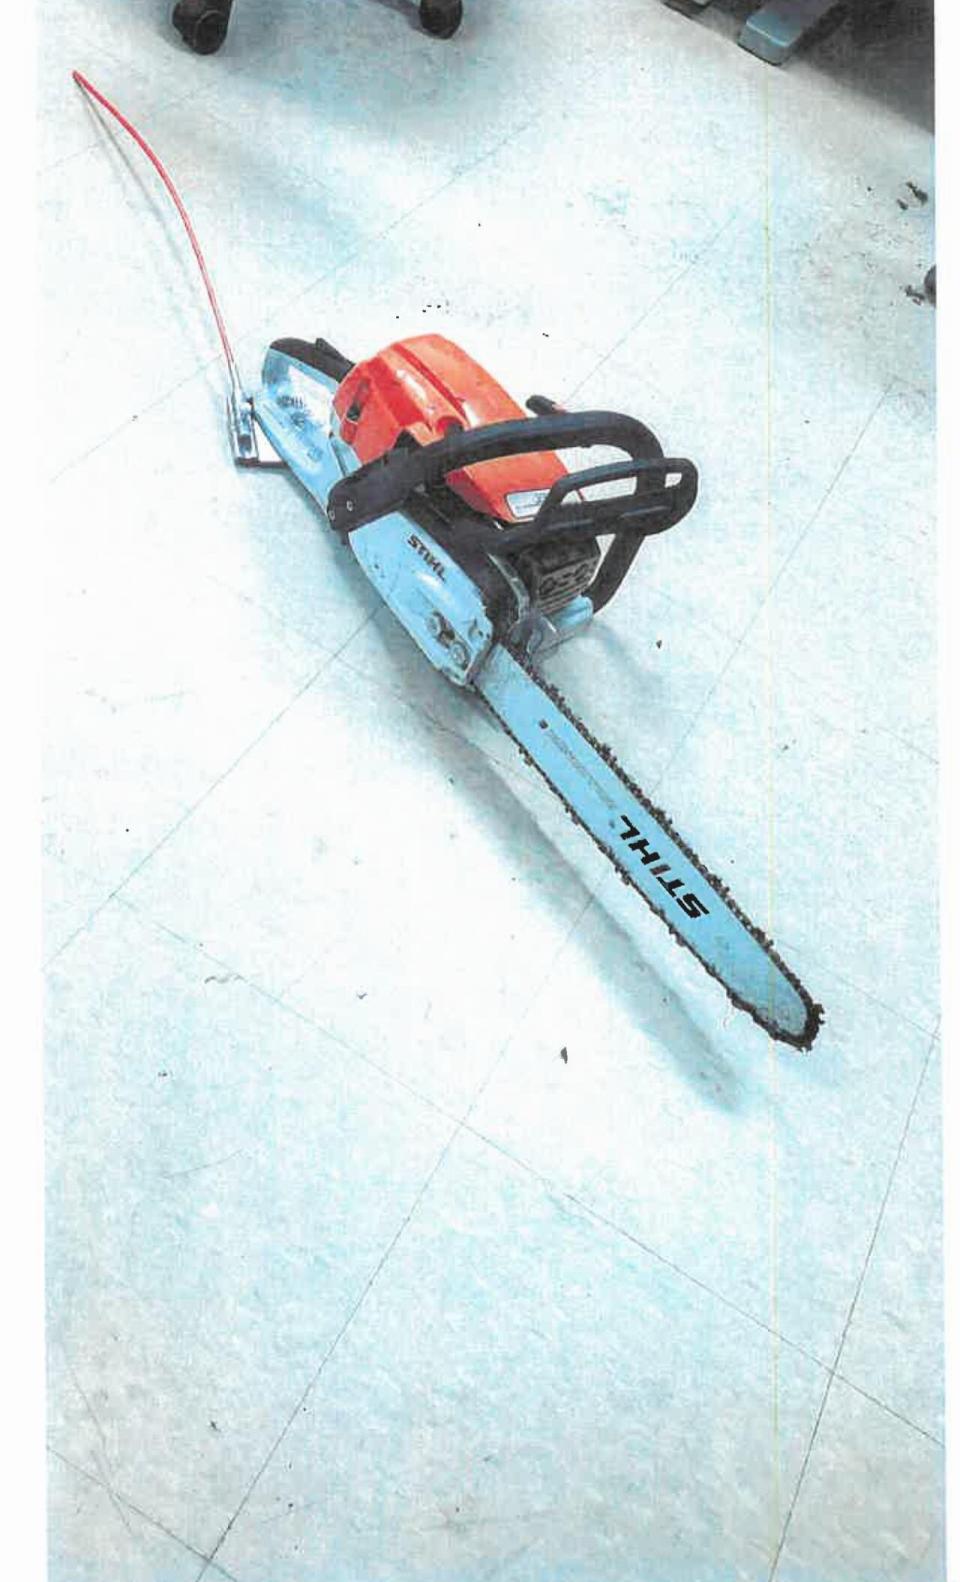 A photo entered as an exhibit during the sentencing hearing shows the chainsaw Augustine was holding after the crash. 